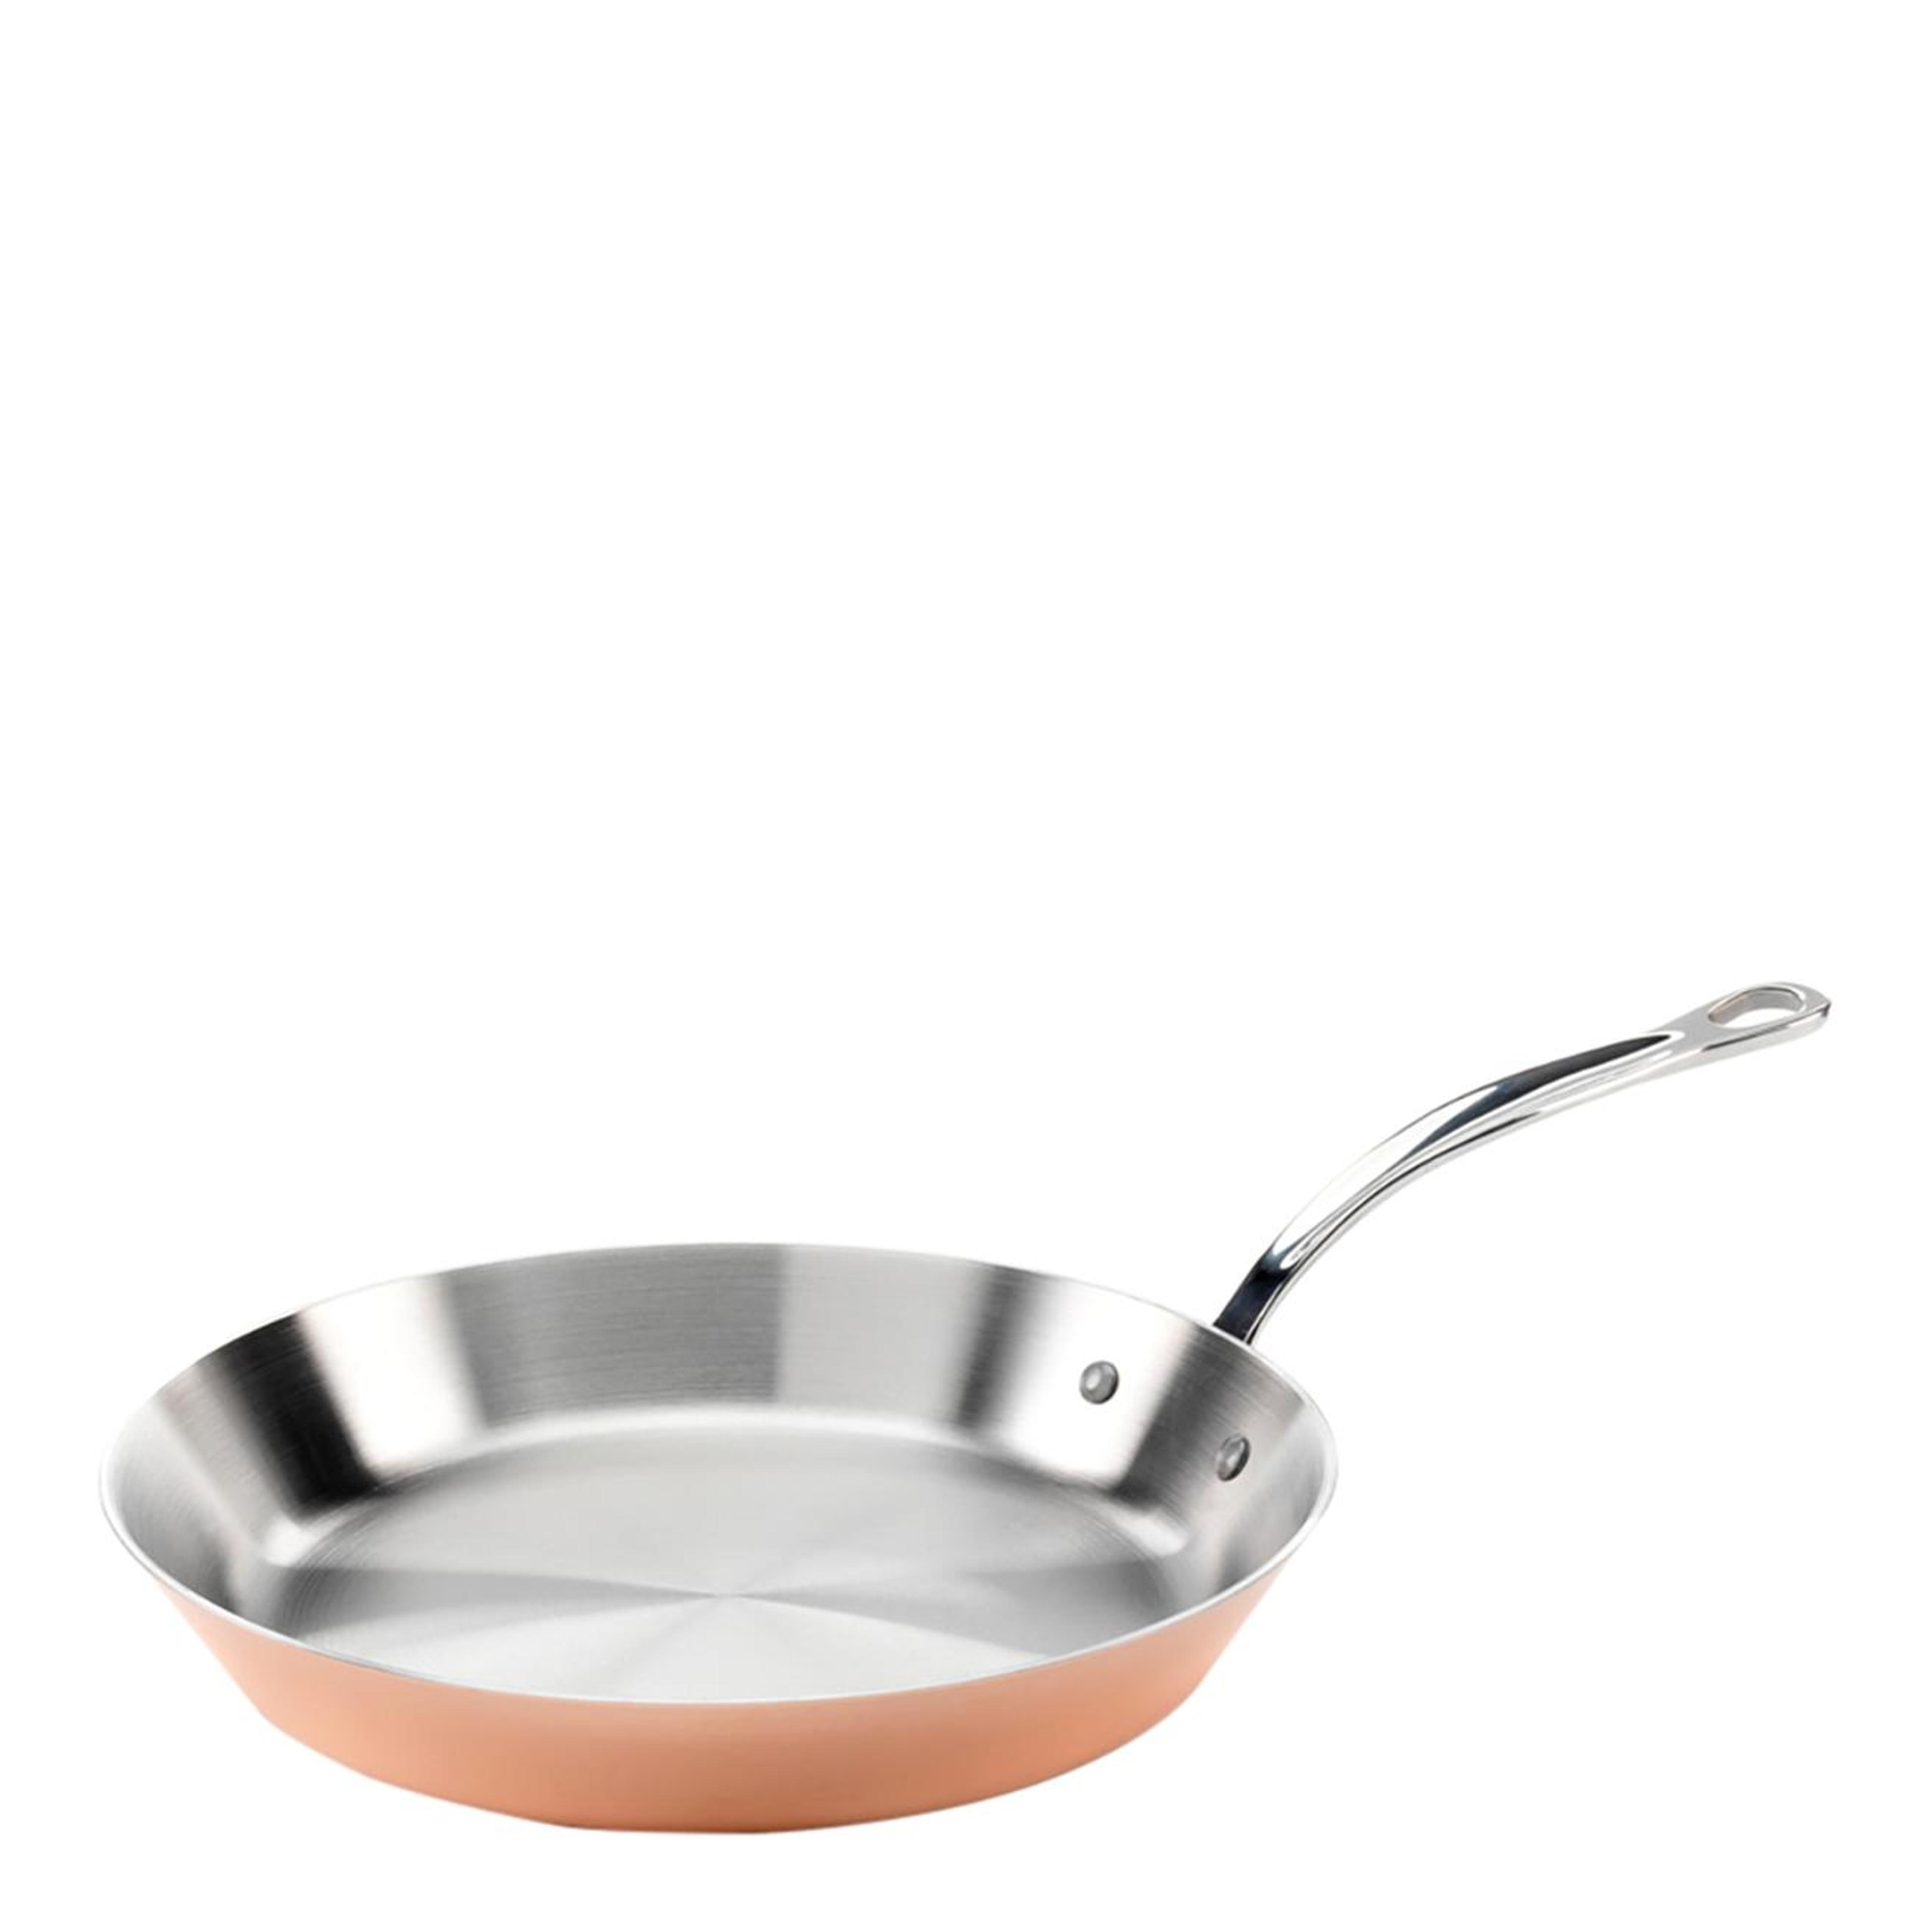 28cm Copper Induction Frypan - BrandAlley